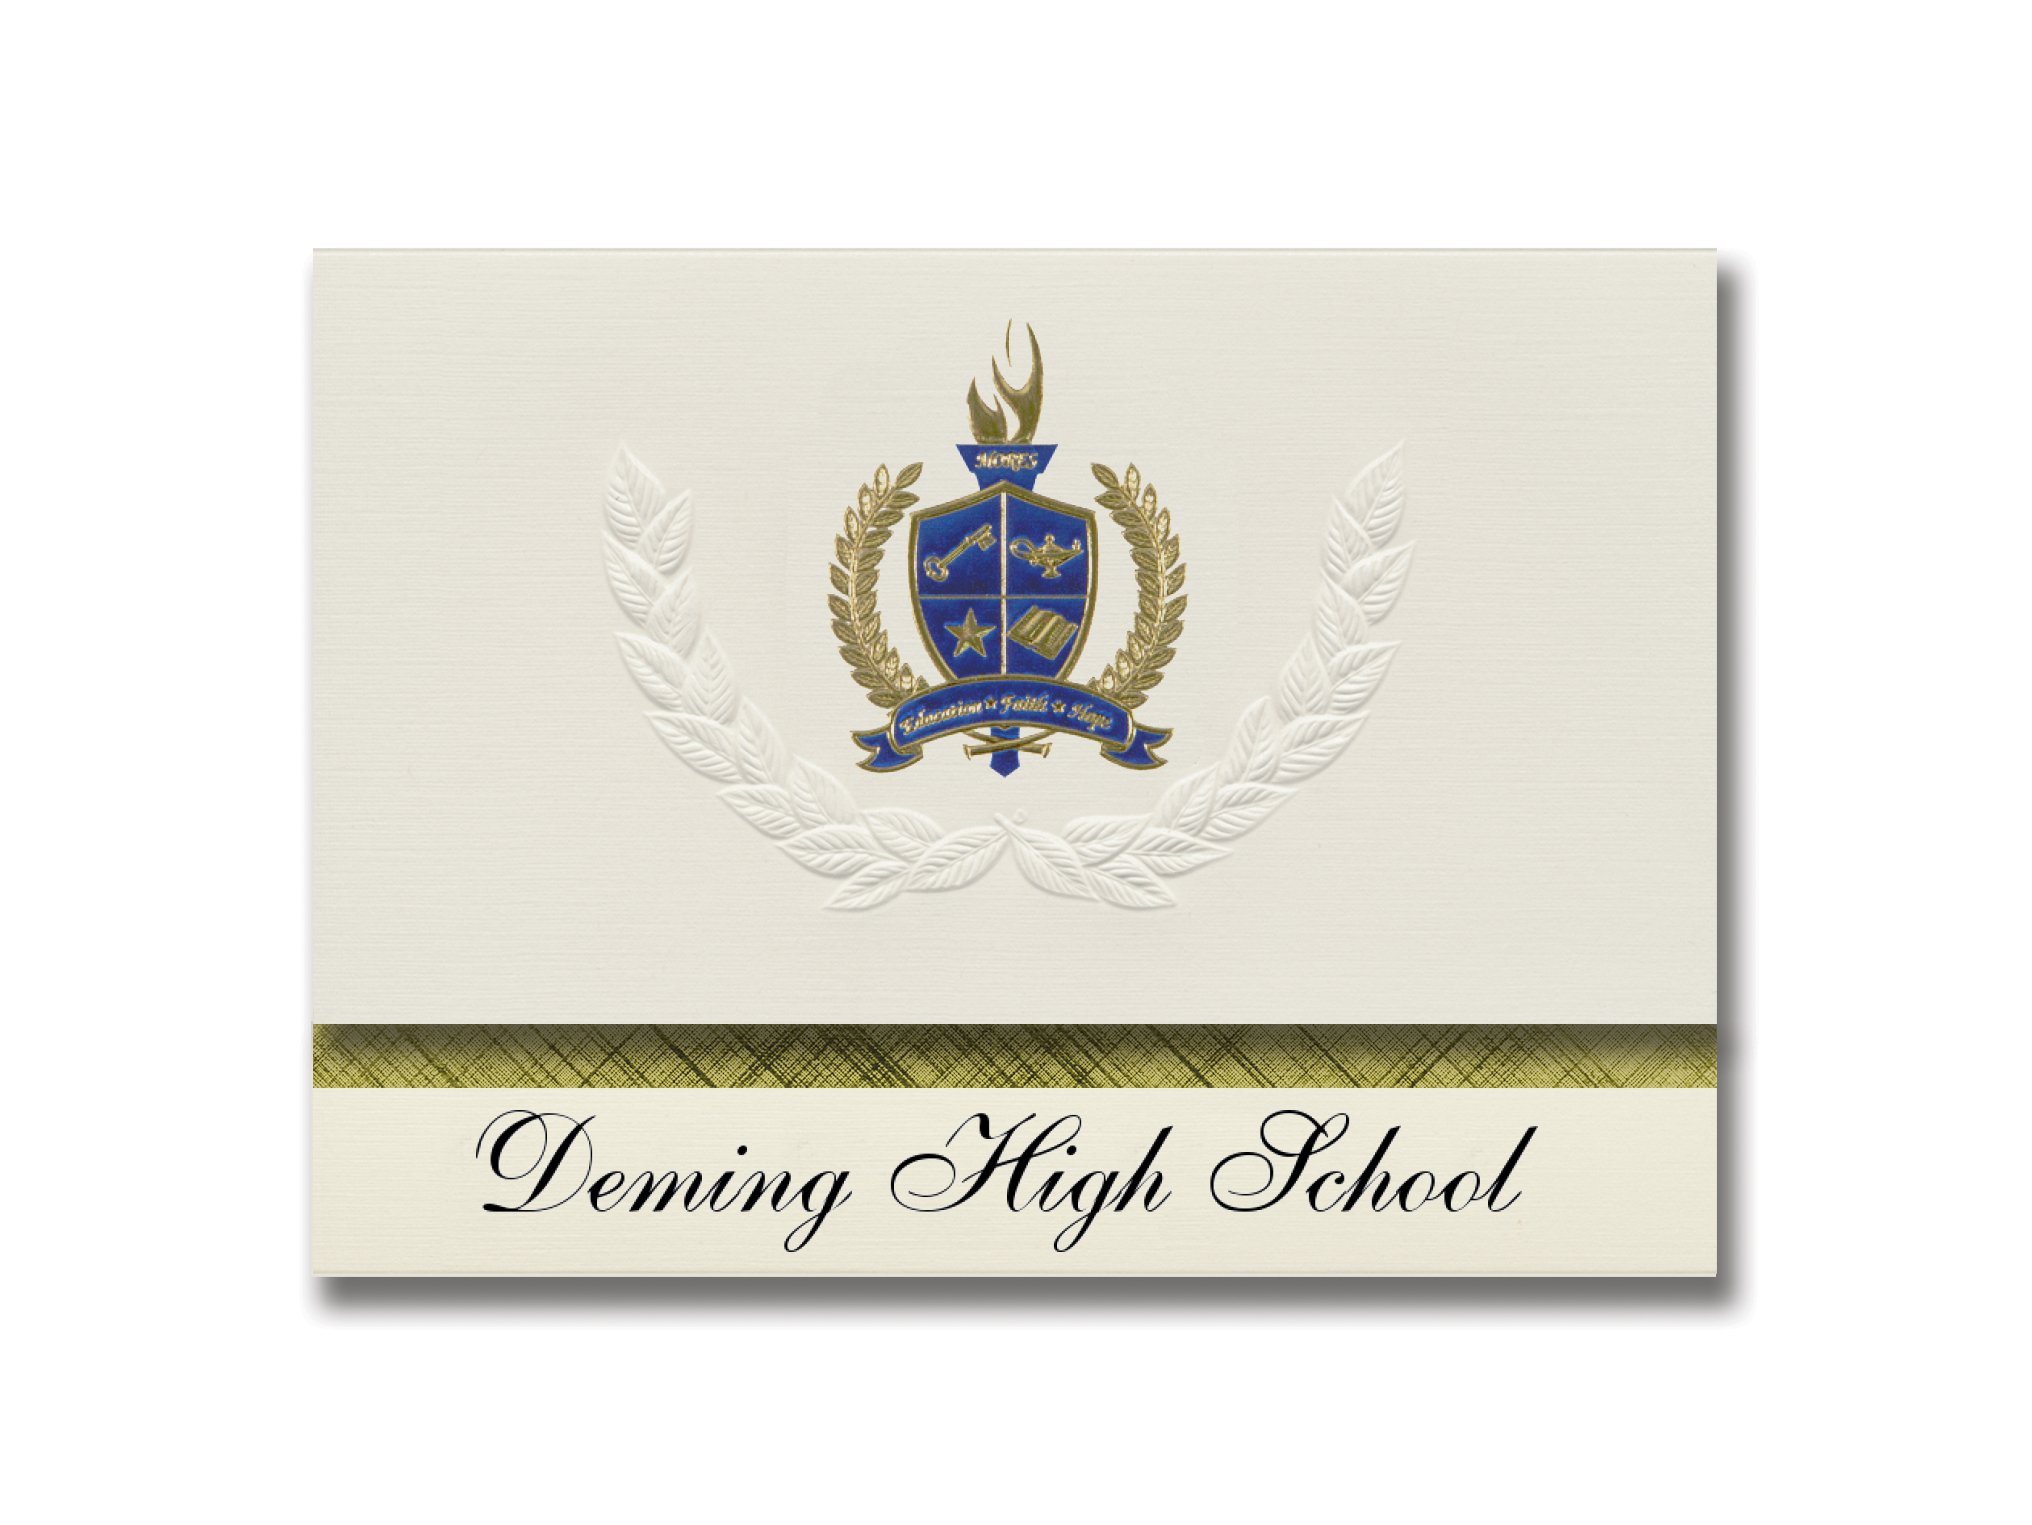 Signature Announcements Deming High School (Deming, NM) Graduation Announcements, Presidential style, Basic package of 25 with Gold & Blue Metallic...